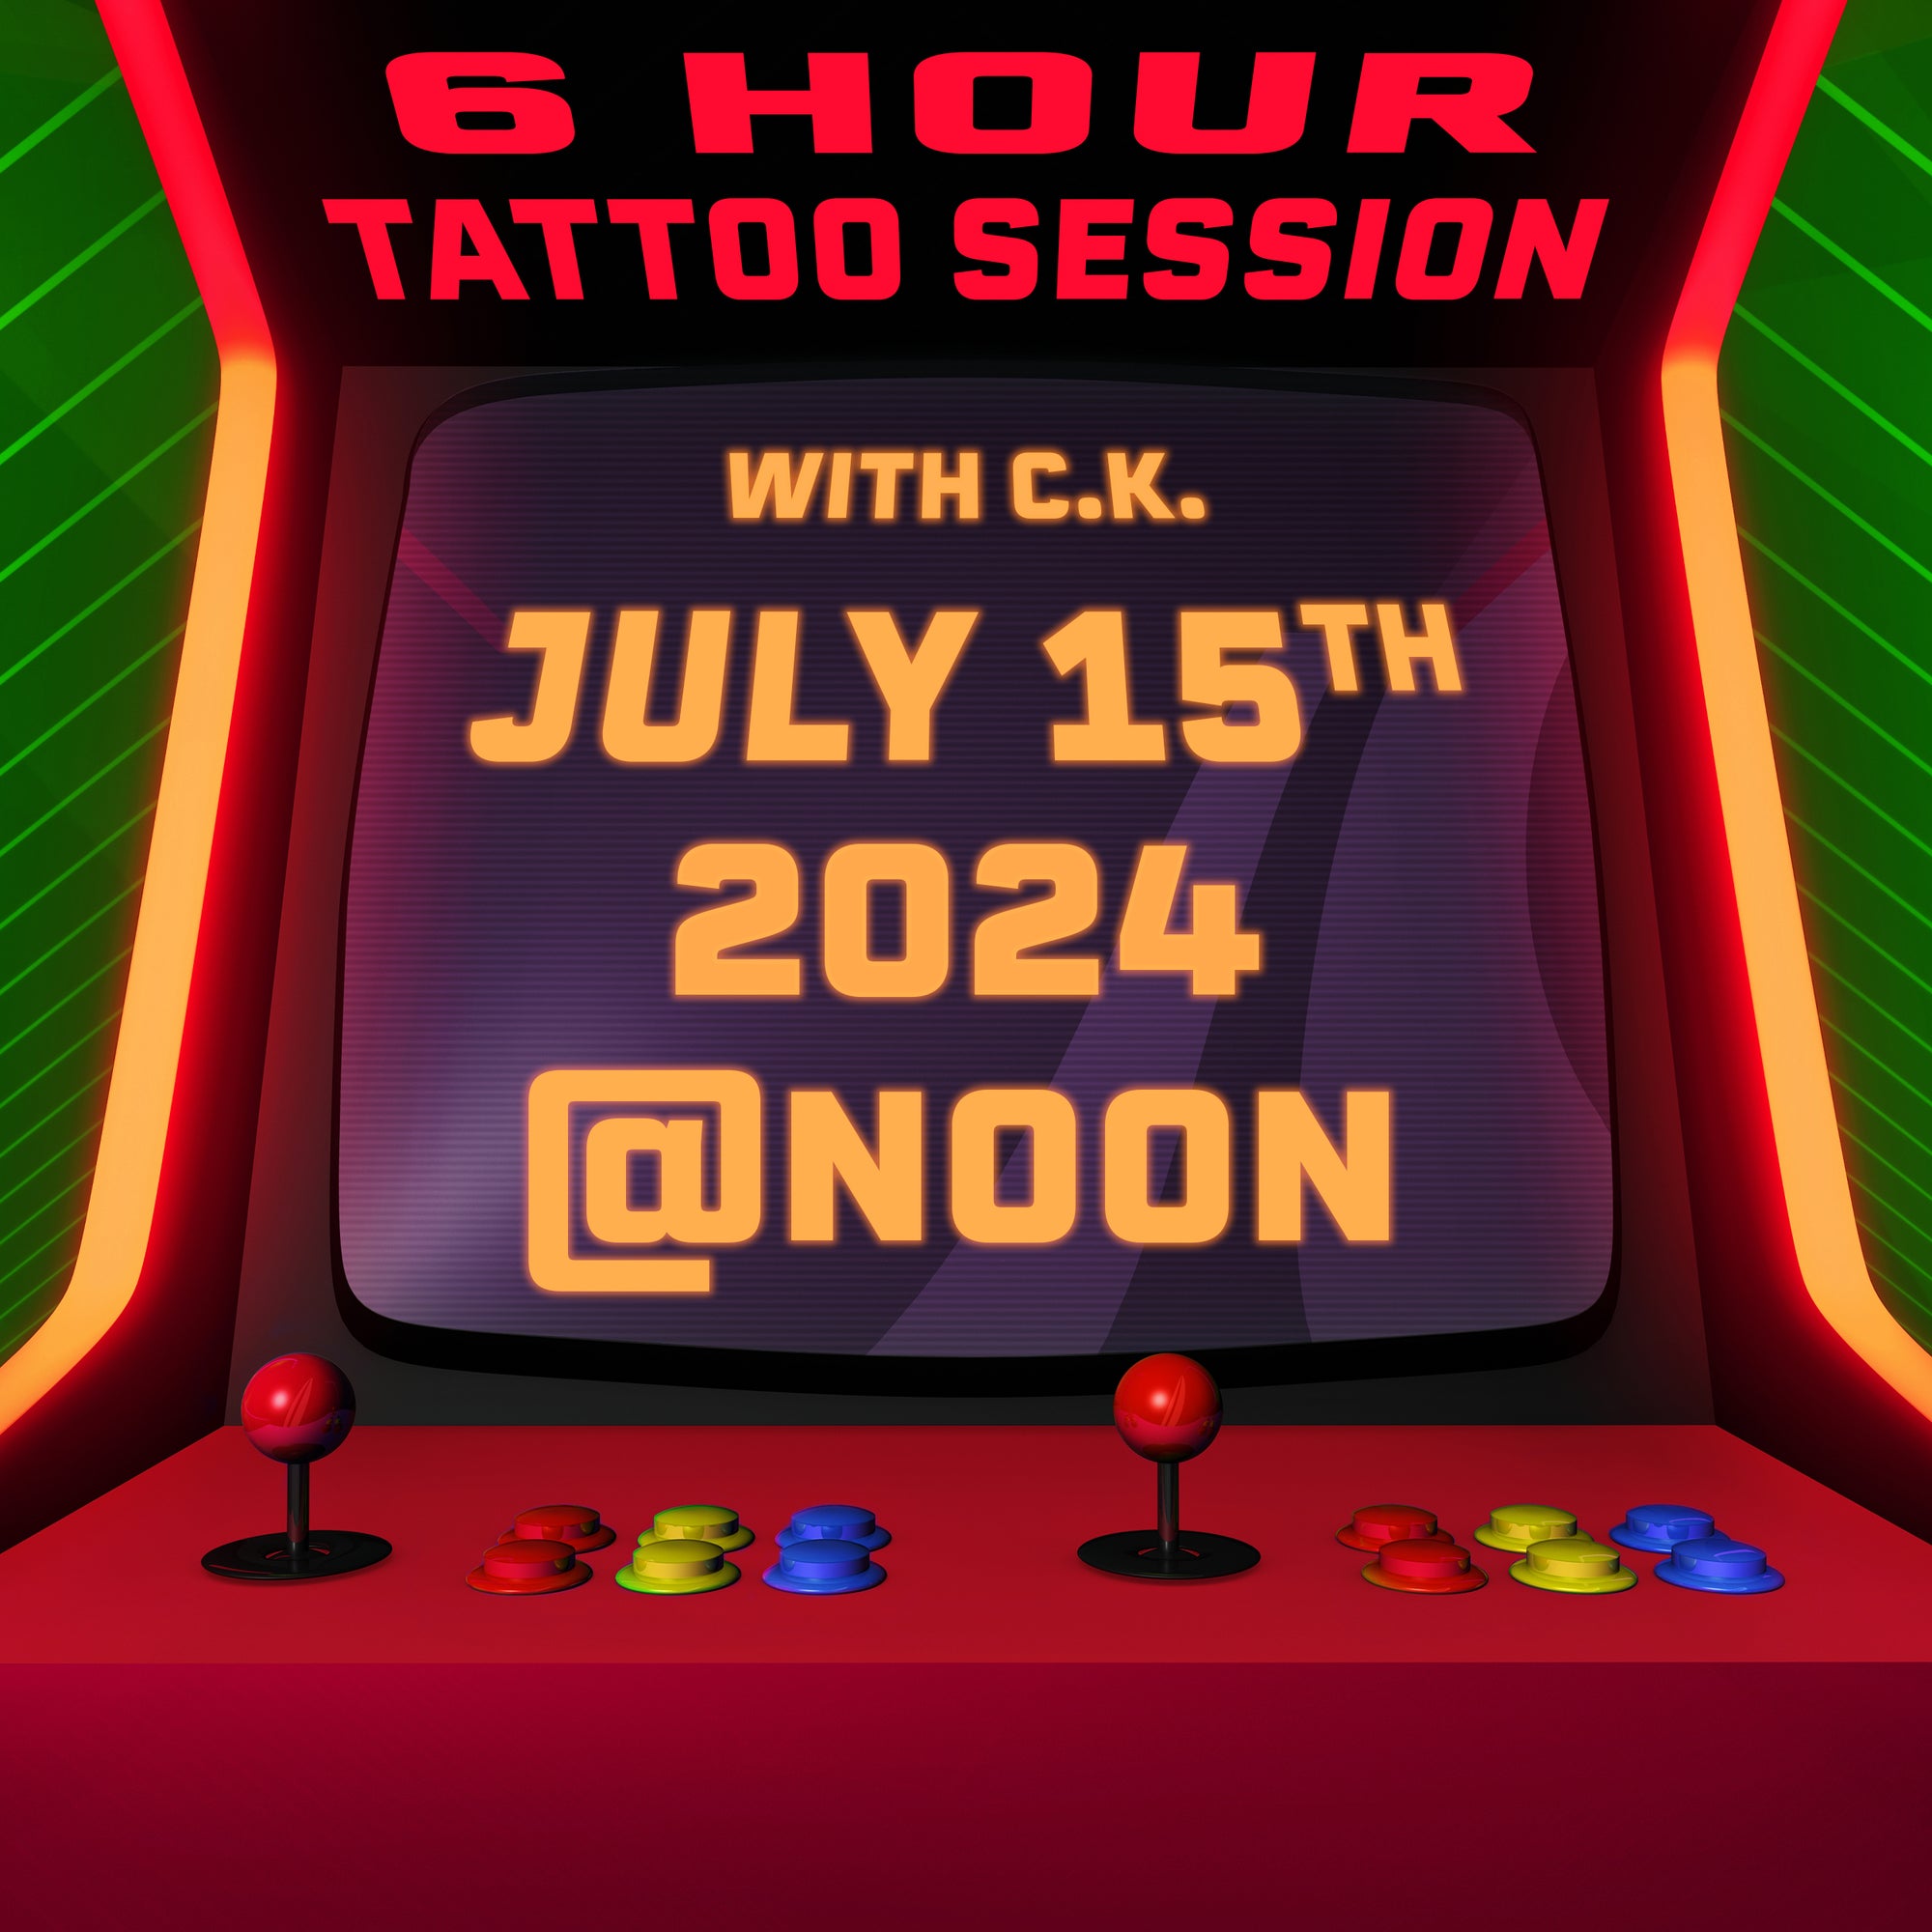 6 hour Tattoo Session with CK July 15th, 2024